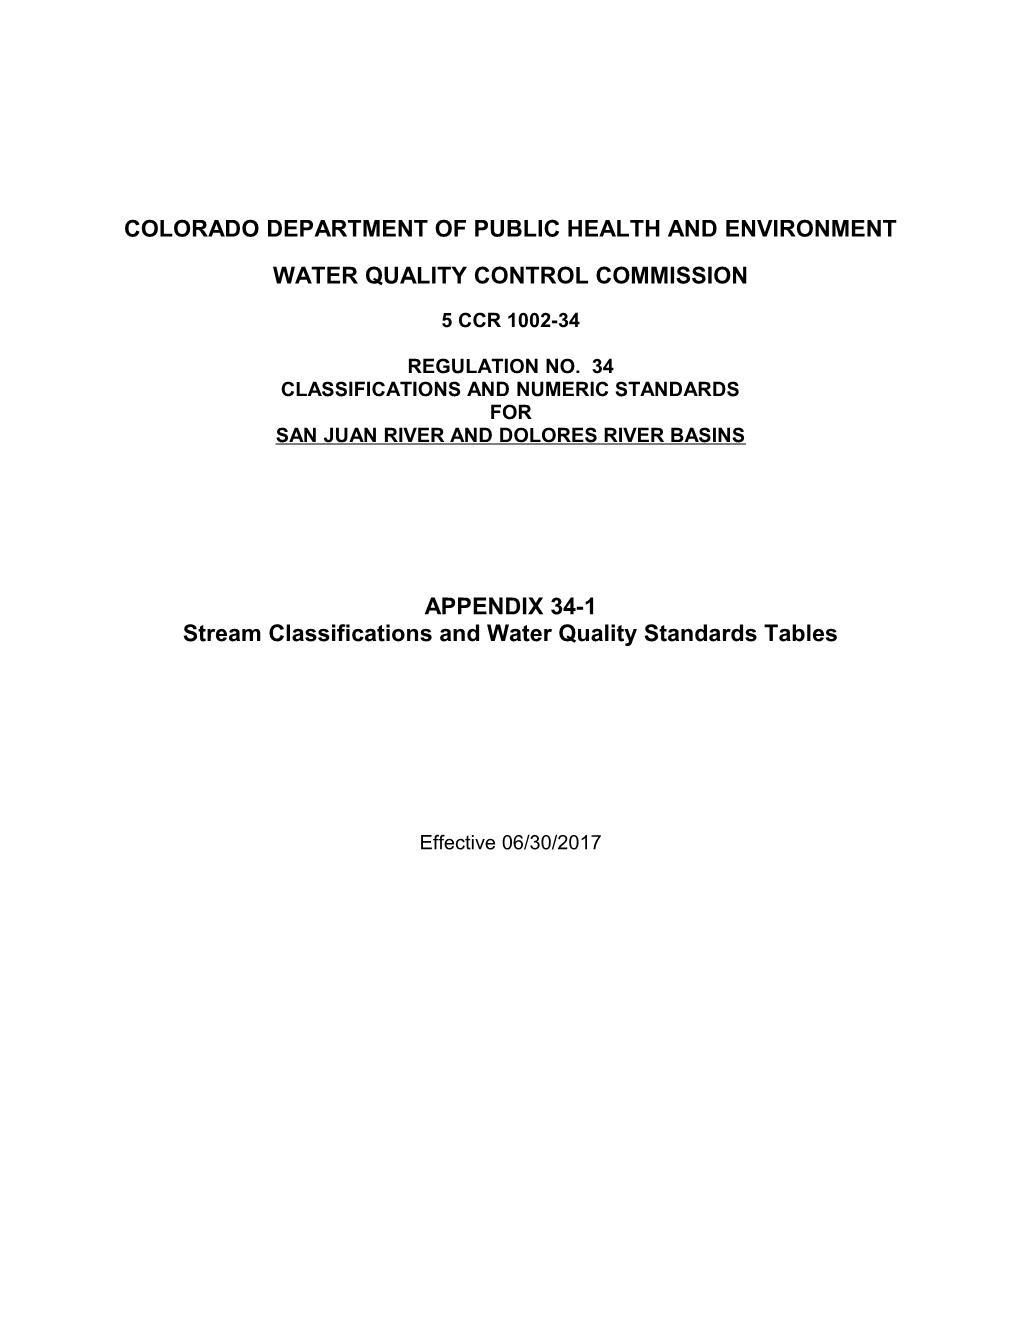 Colorado Department of Public Health and Environment s5